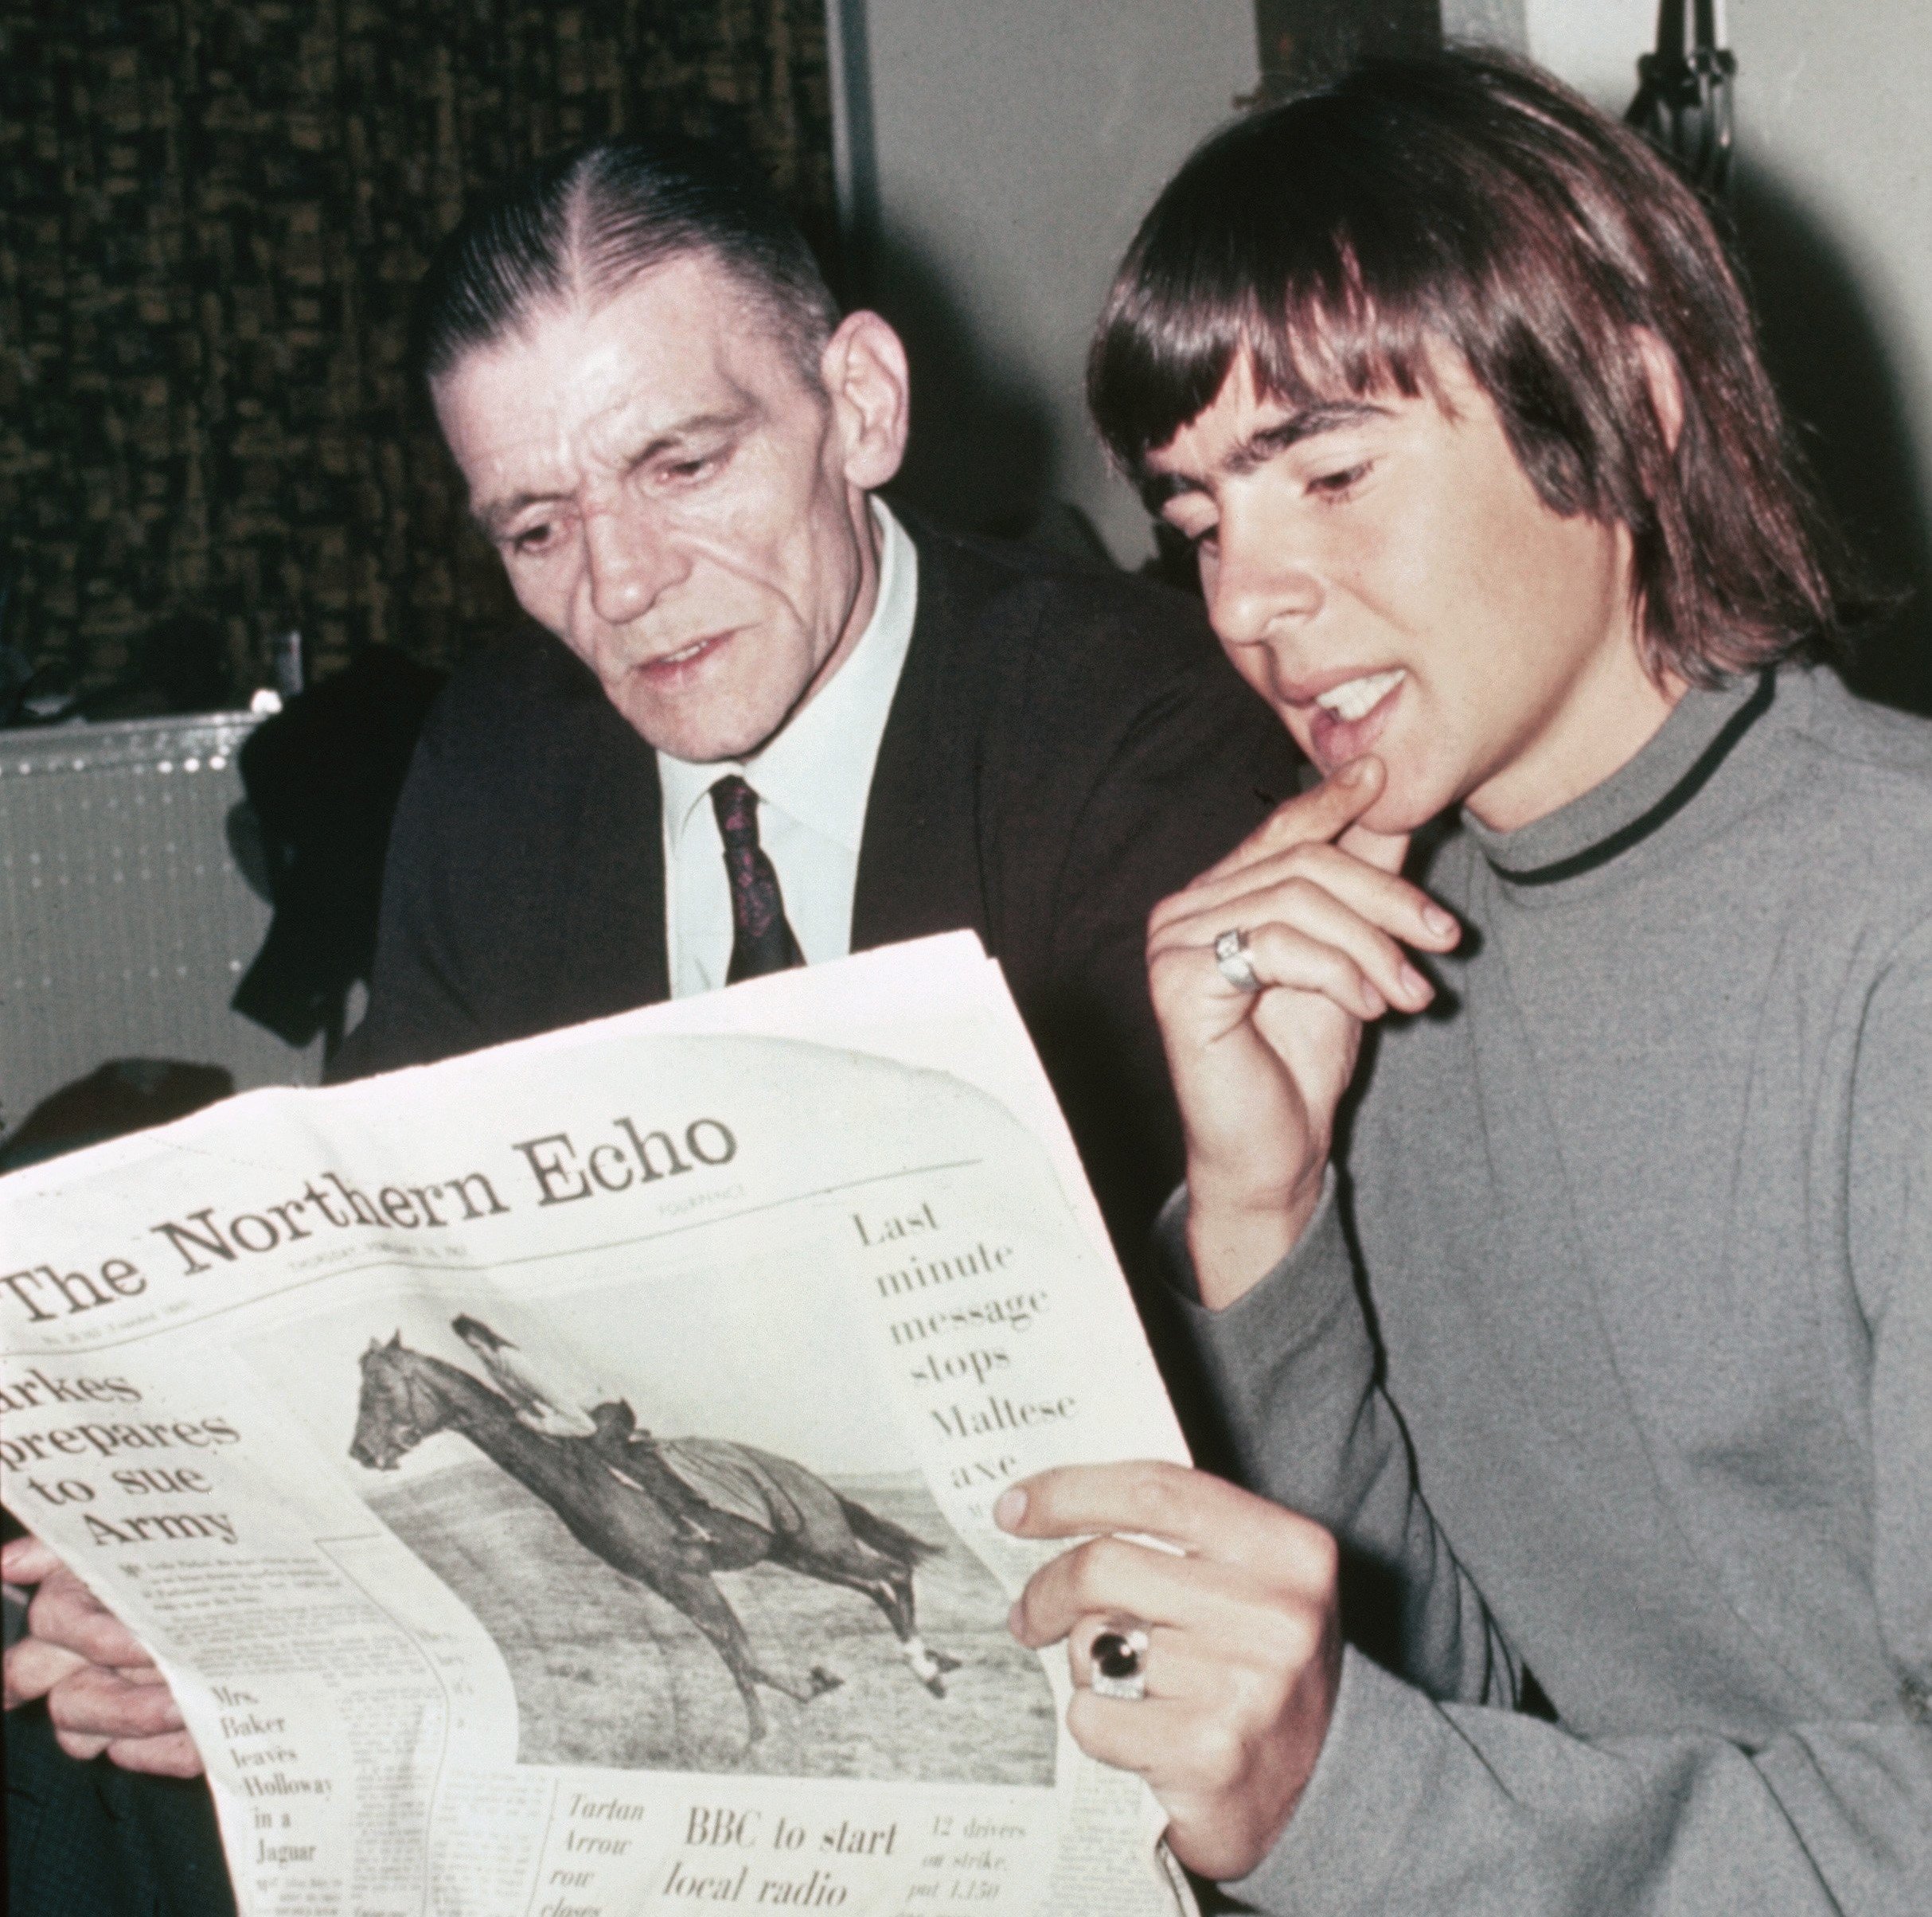 The Monkees' Davy Jones and his father, Harry Jones, with a newspaper